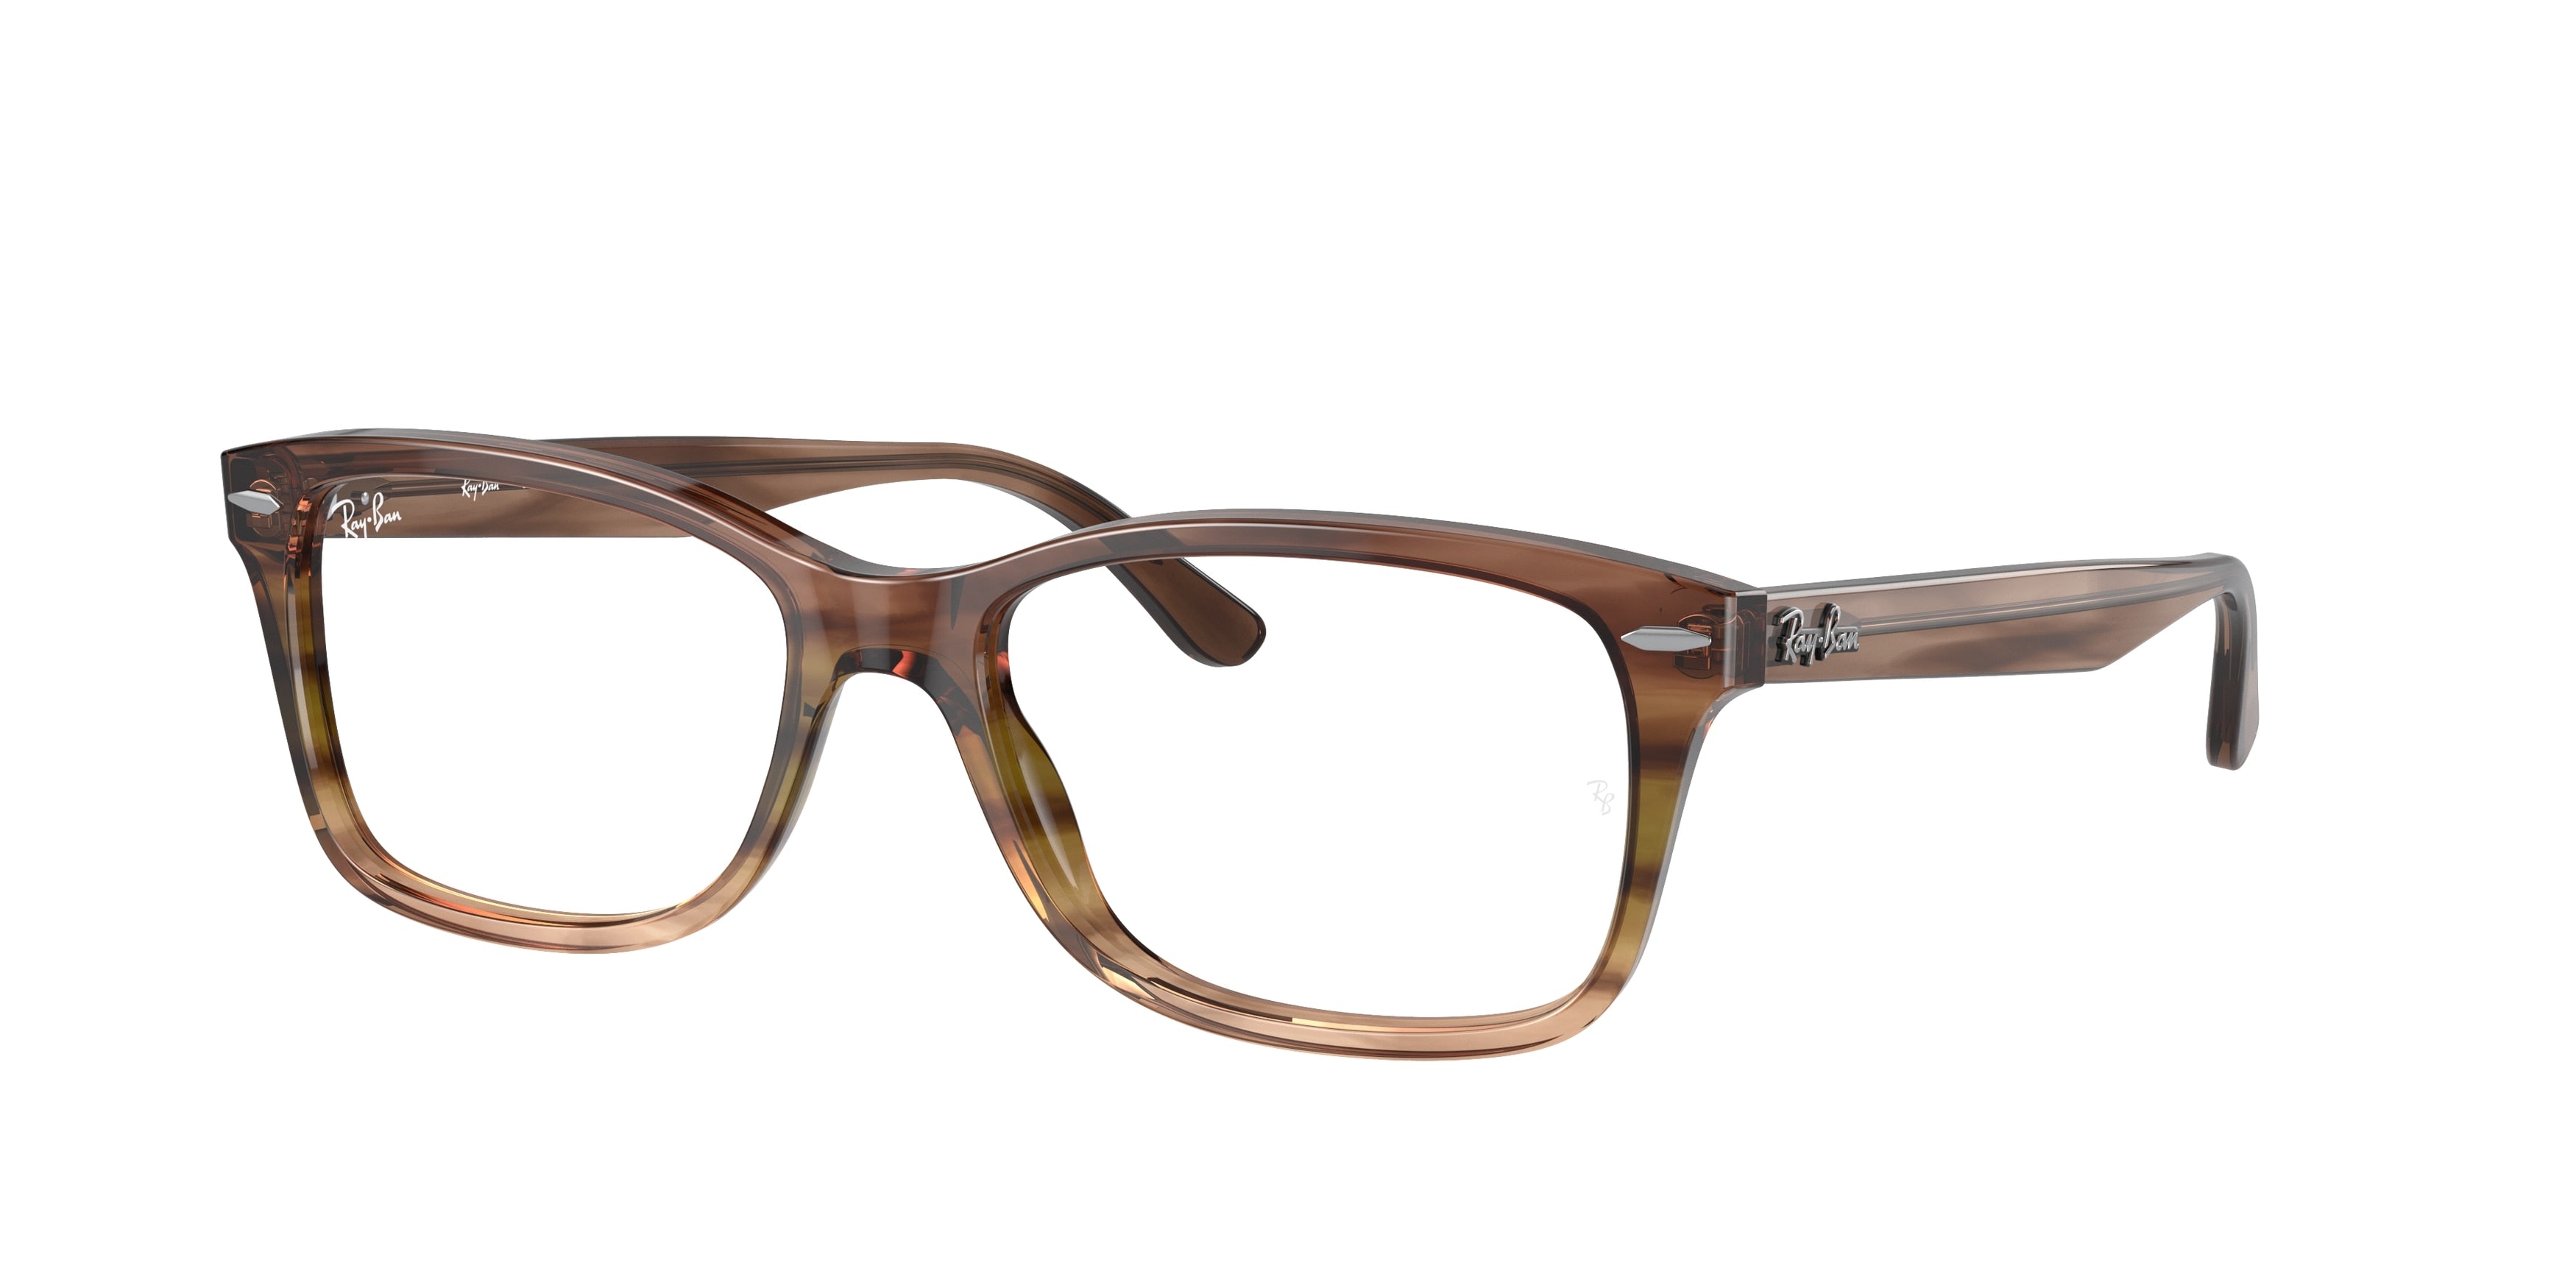 Ray-Ban Optical RX5428 Square Eyeglasses  8255-Striped Brown & Green 55-145-17 - Color Map Brown